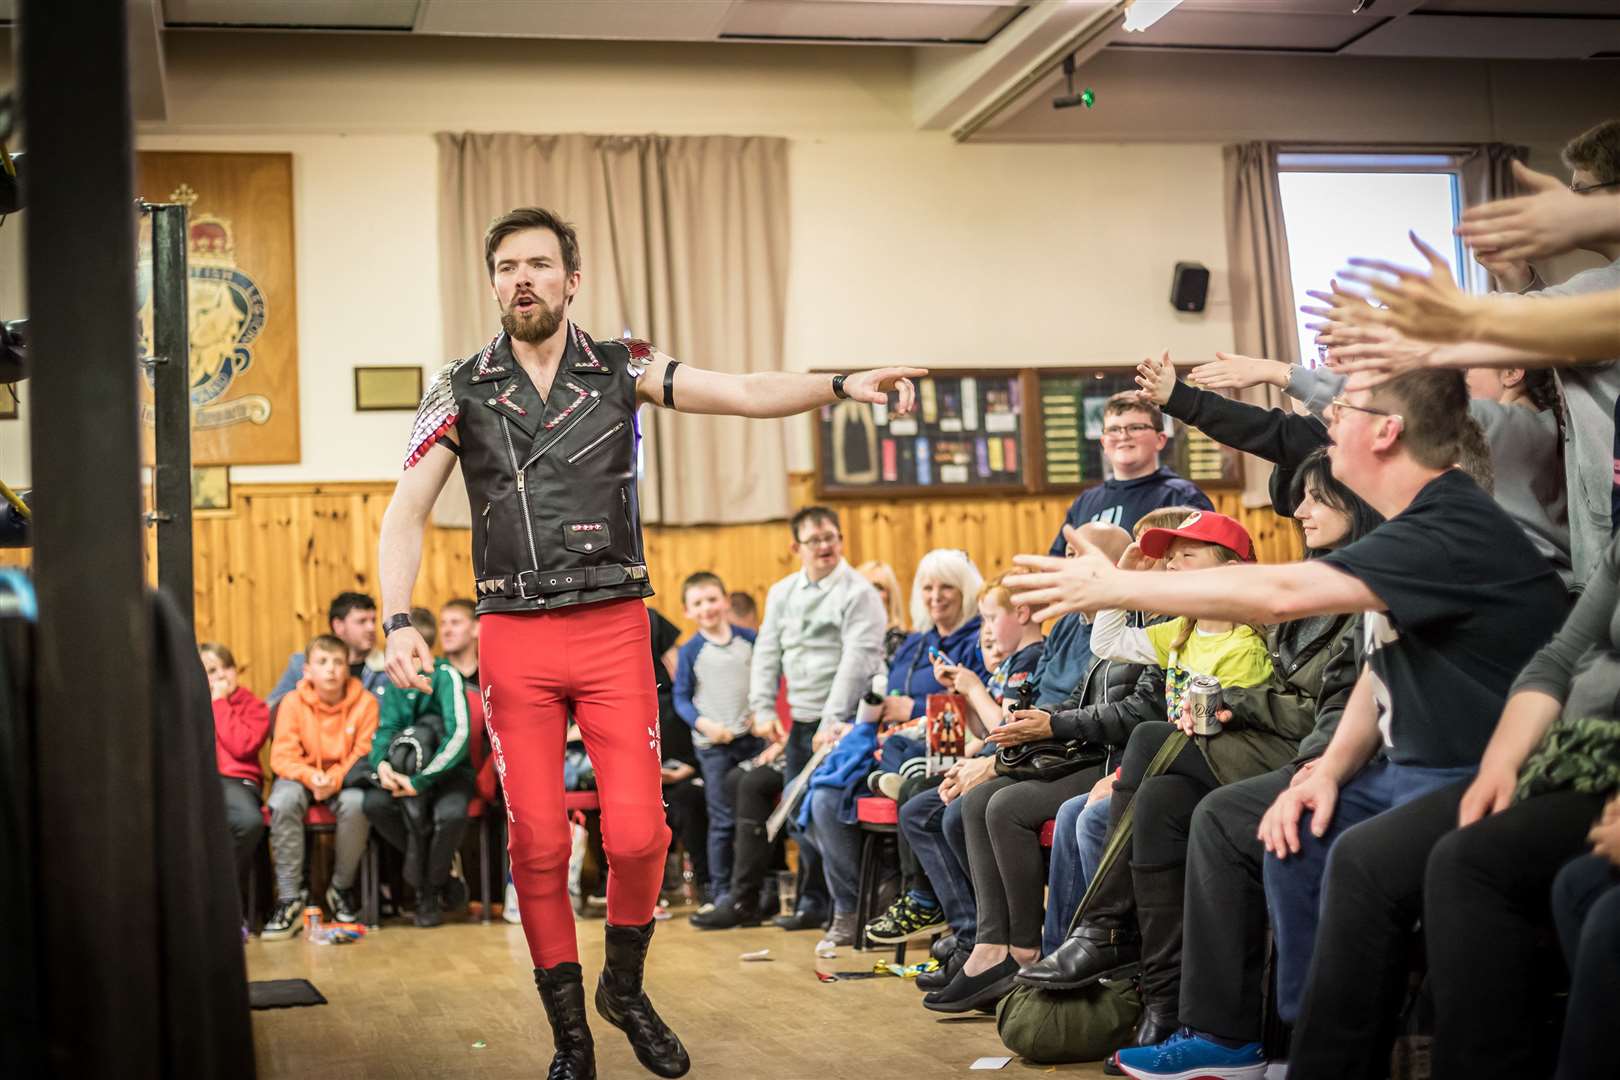 Lad Chapman gets the crowd at Thurso going during a bout last year. Lad will be back to entertain grapple fans as the wrestling carnival rolls back into town. Picture: Duncan McLachlan